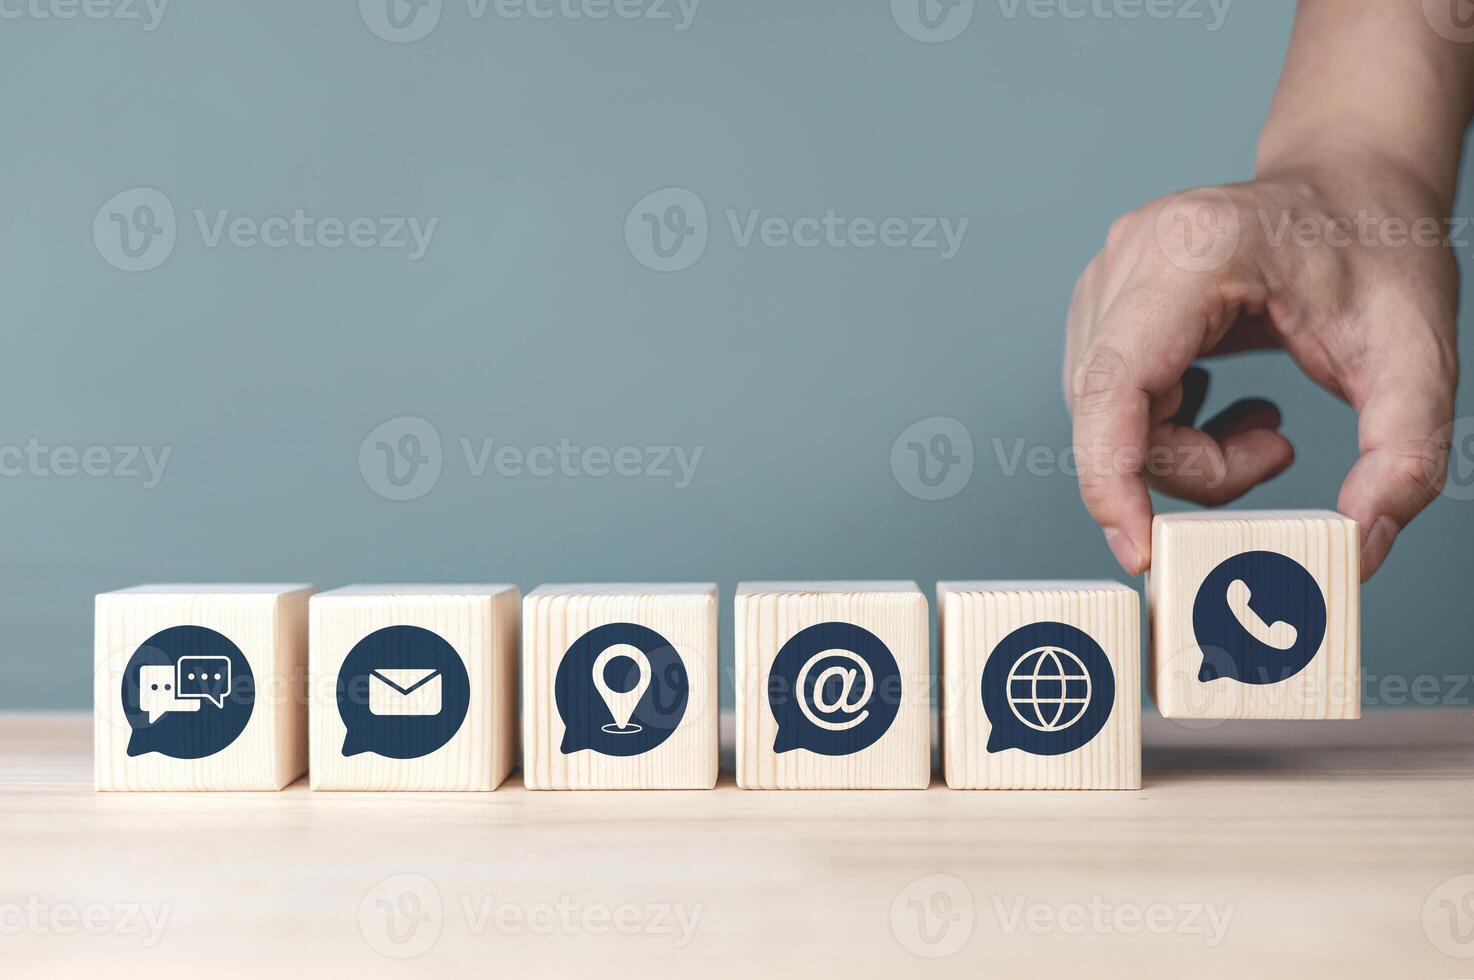 Contact us service hotline. Address, phone number, email and chat icons on wood block. concept of customer service department providing troubleshooting and answering inquiries. with copy space photo